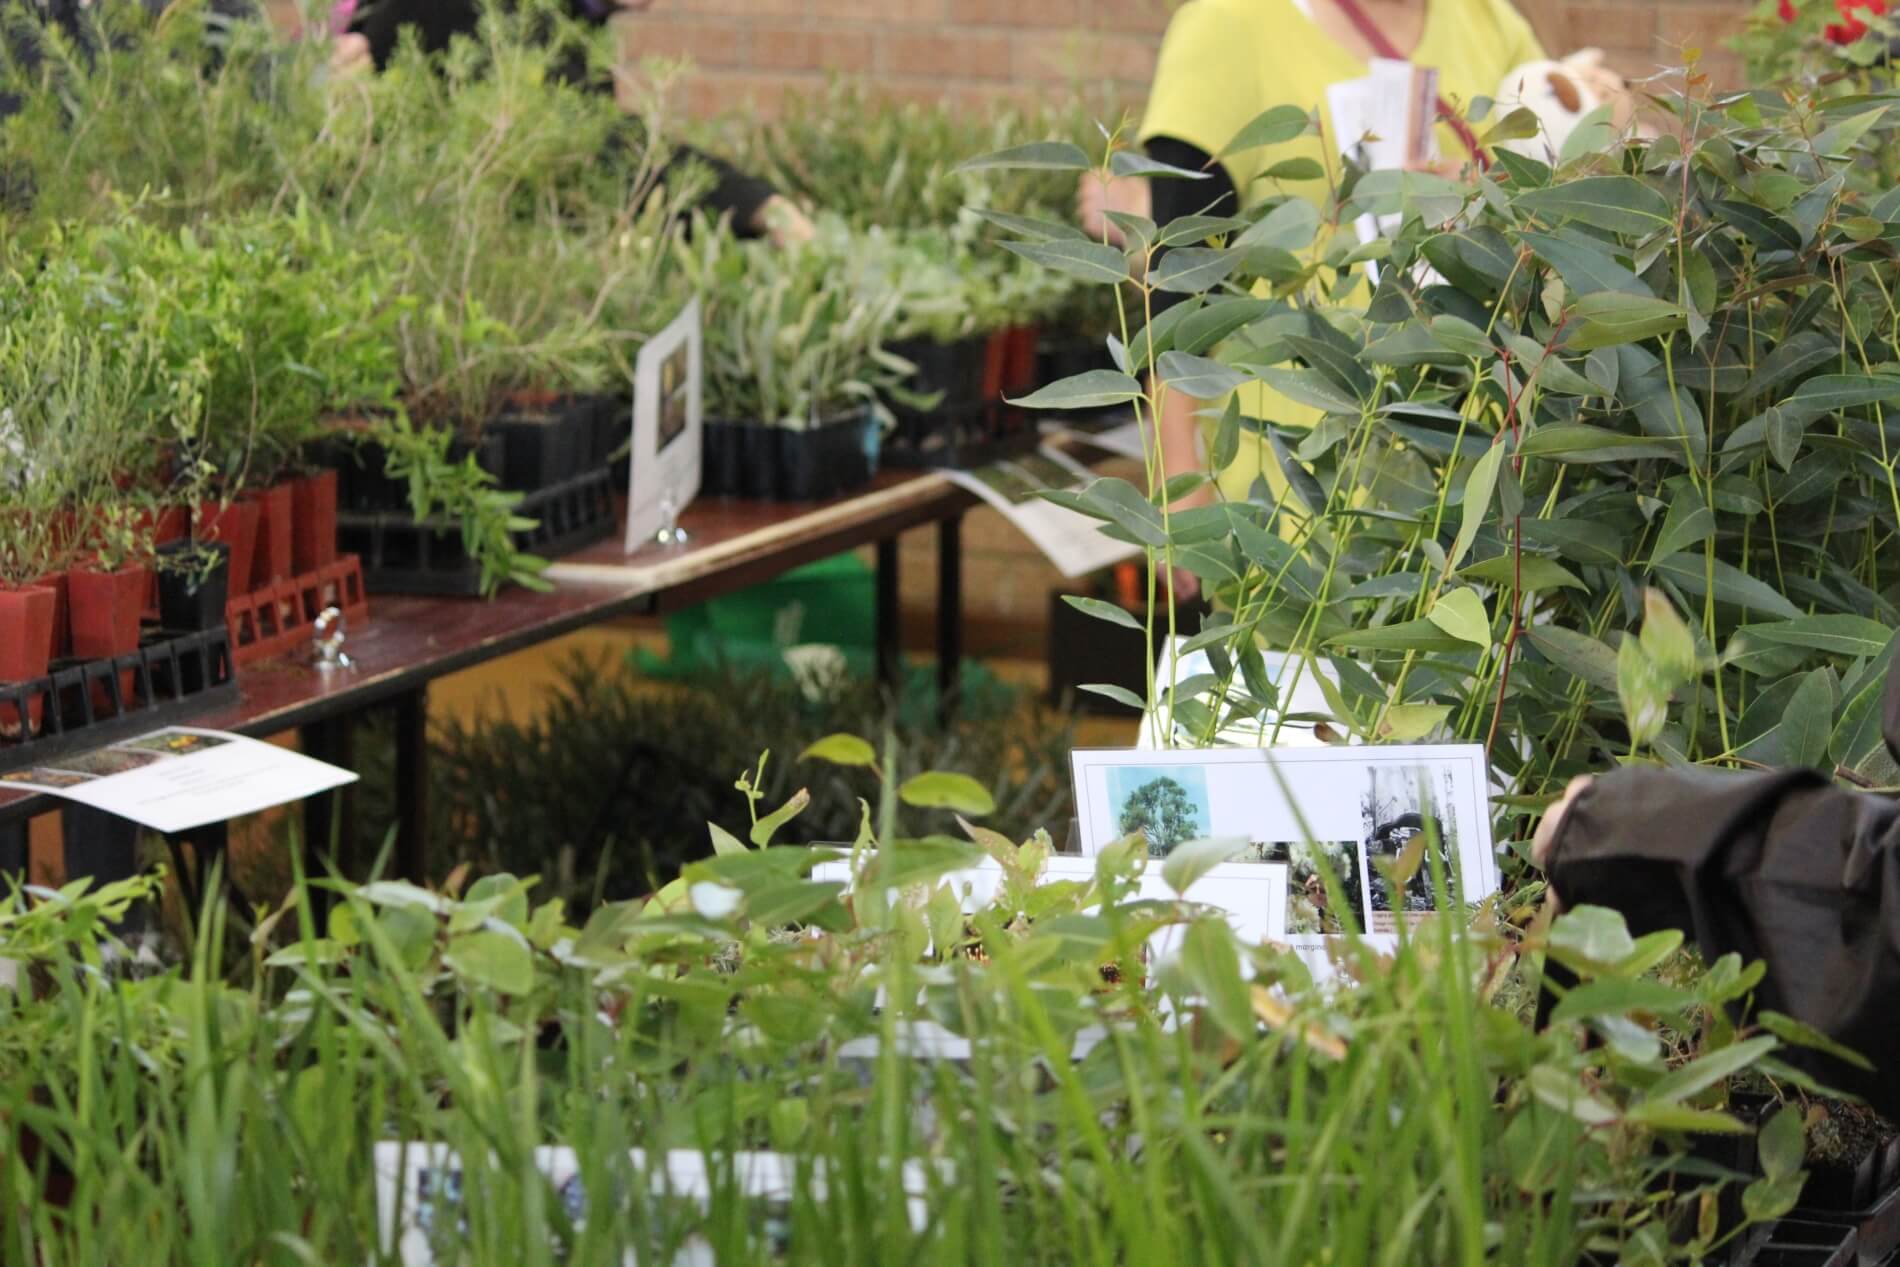 Plants for Residents - View of some of the seedlings available for residents to select